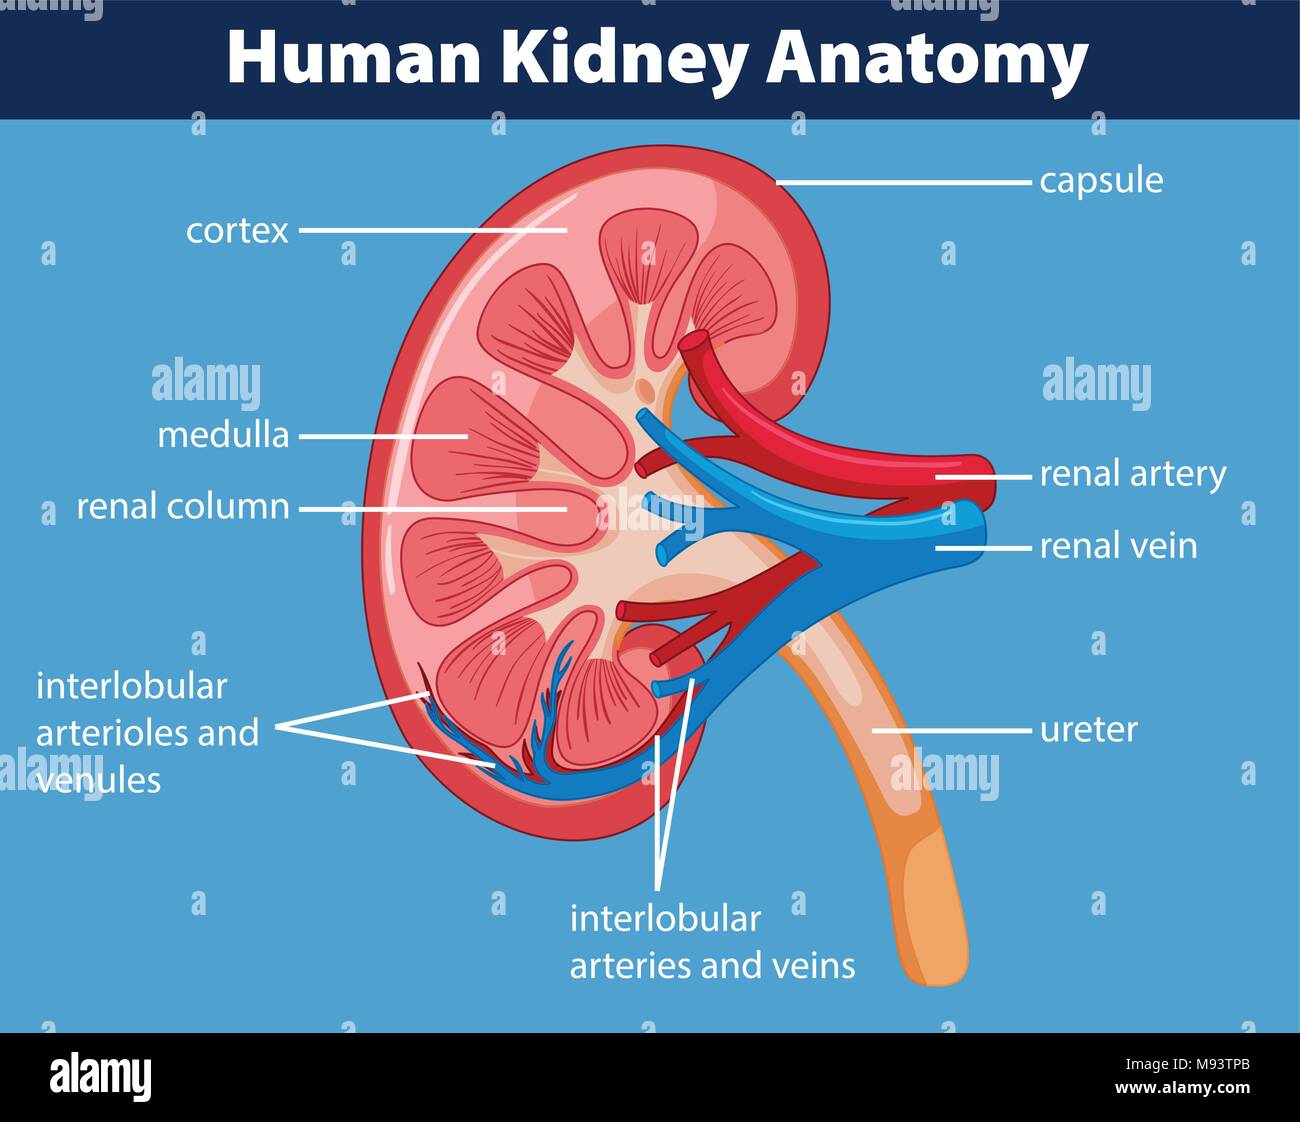 How to draw diagram of kidney easily - step by step - YouTube